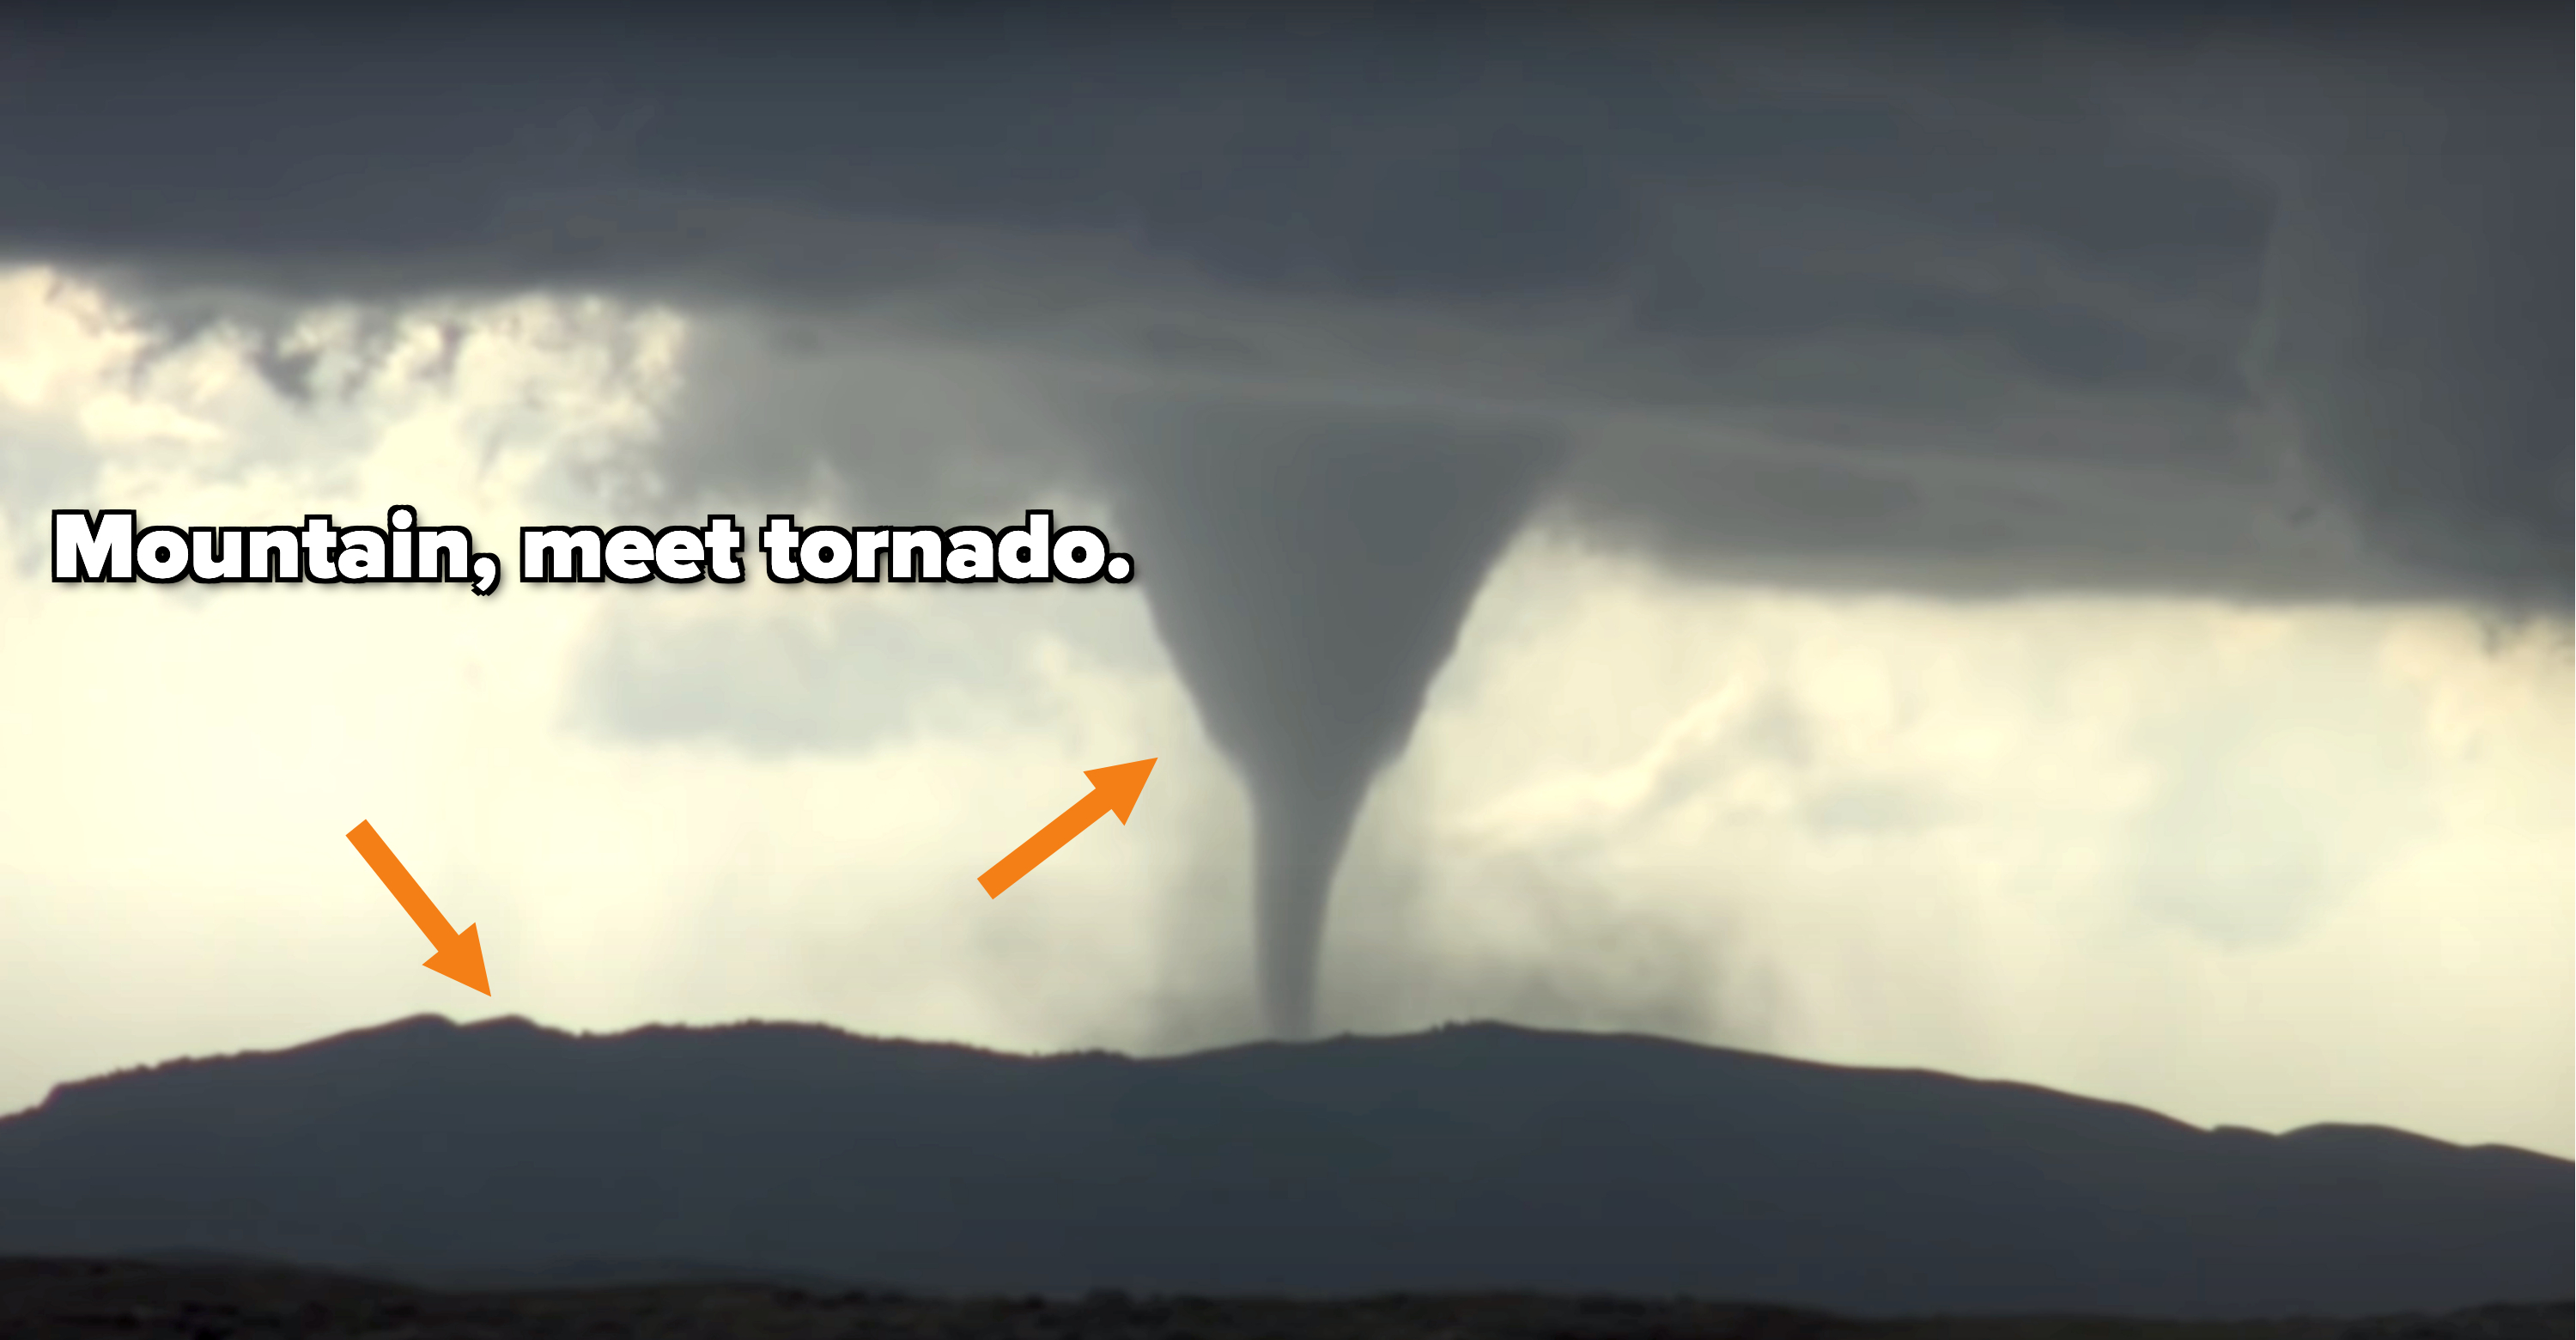 A very large tornado that has touched down on the very top of a mountain